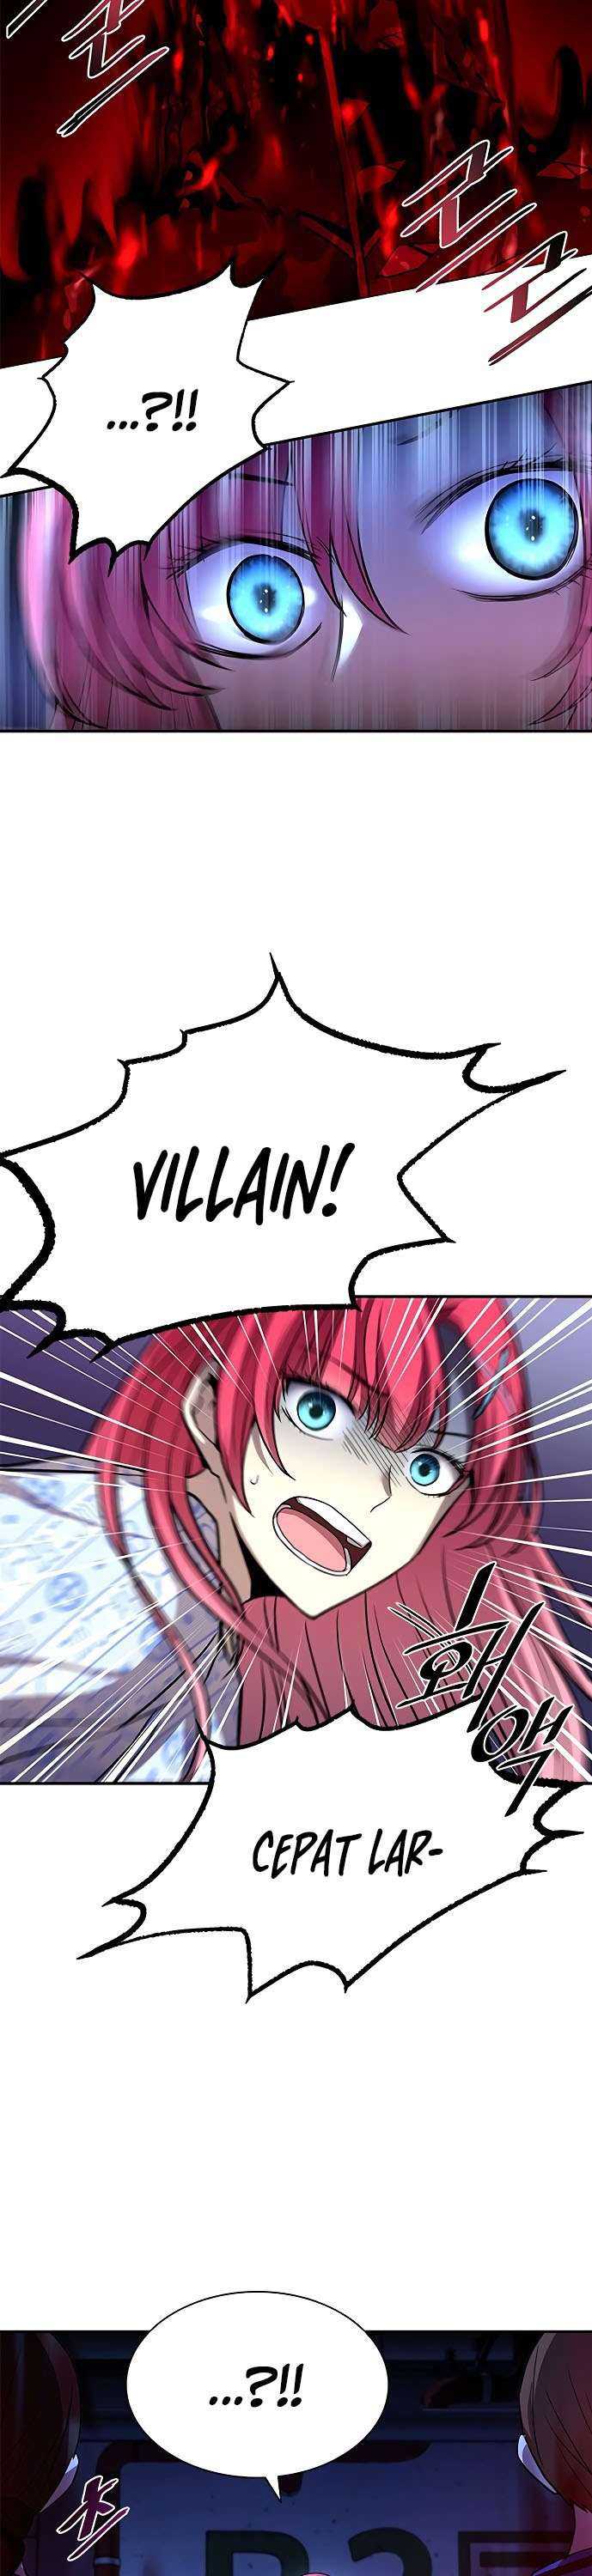 kill-to-villain Chapter chapter-20